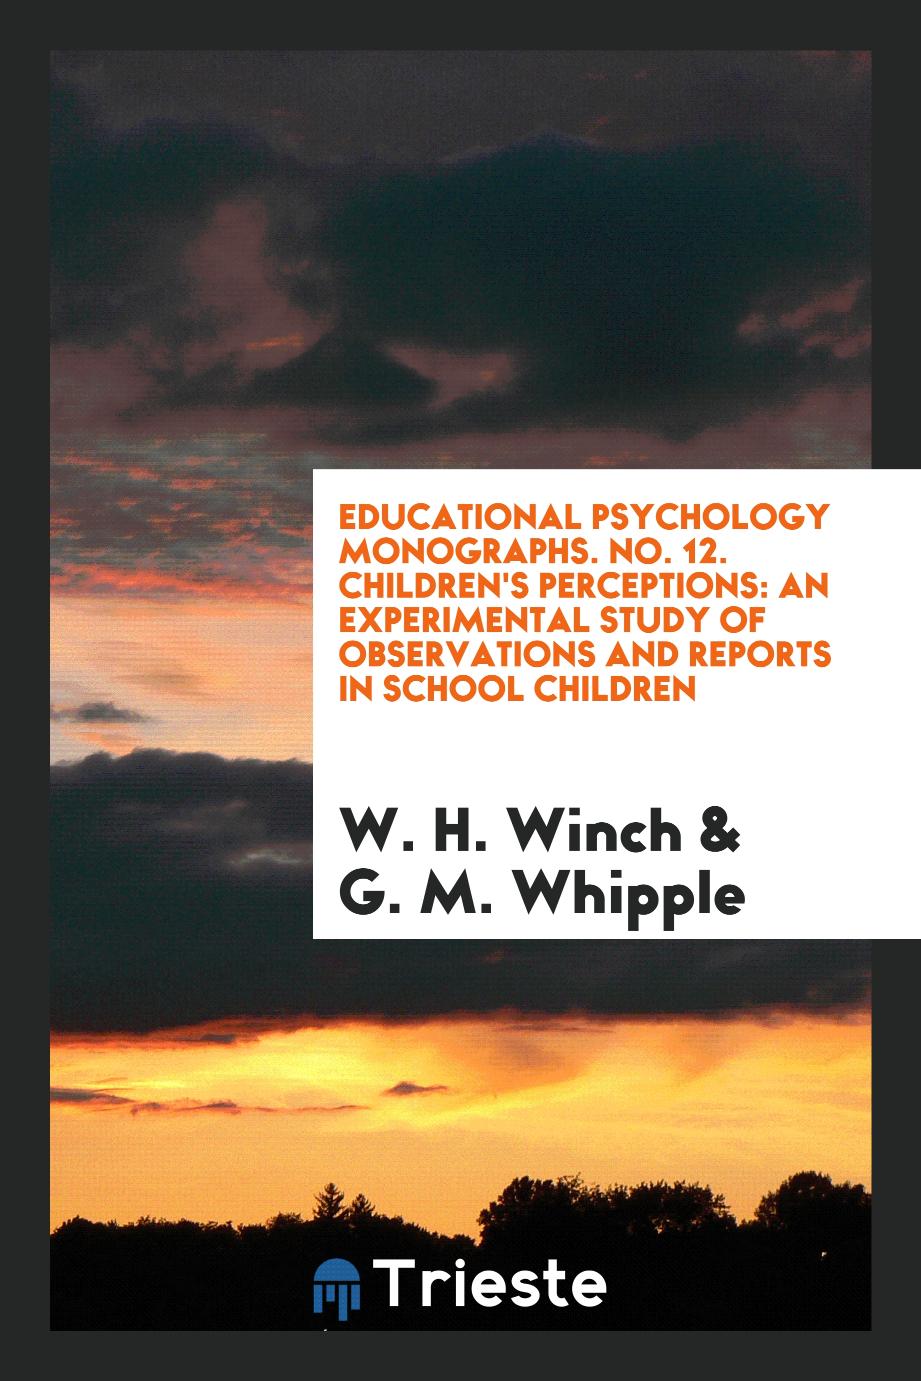 Educational Psychology Monographs. No. 12. Children's Perceptions: An Experimental Study of Observations and Reports in School Children